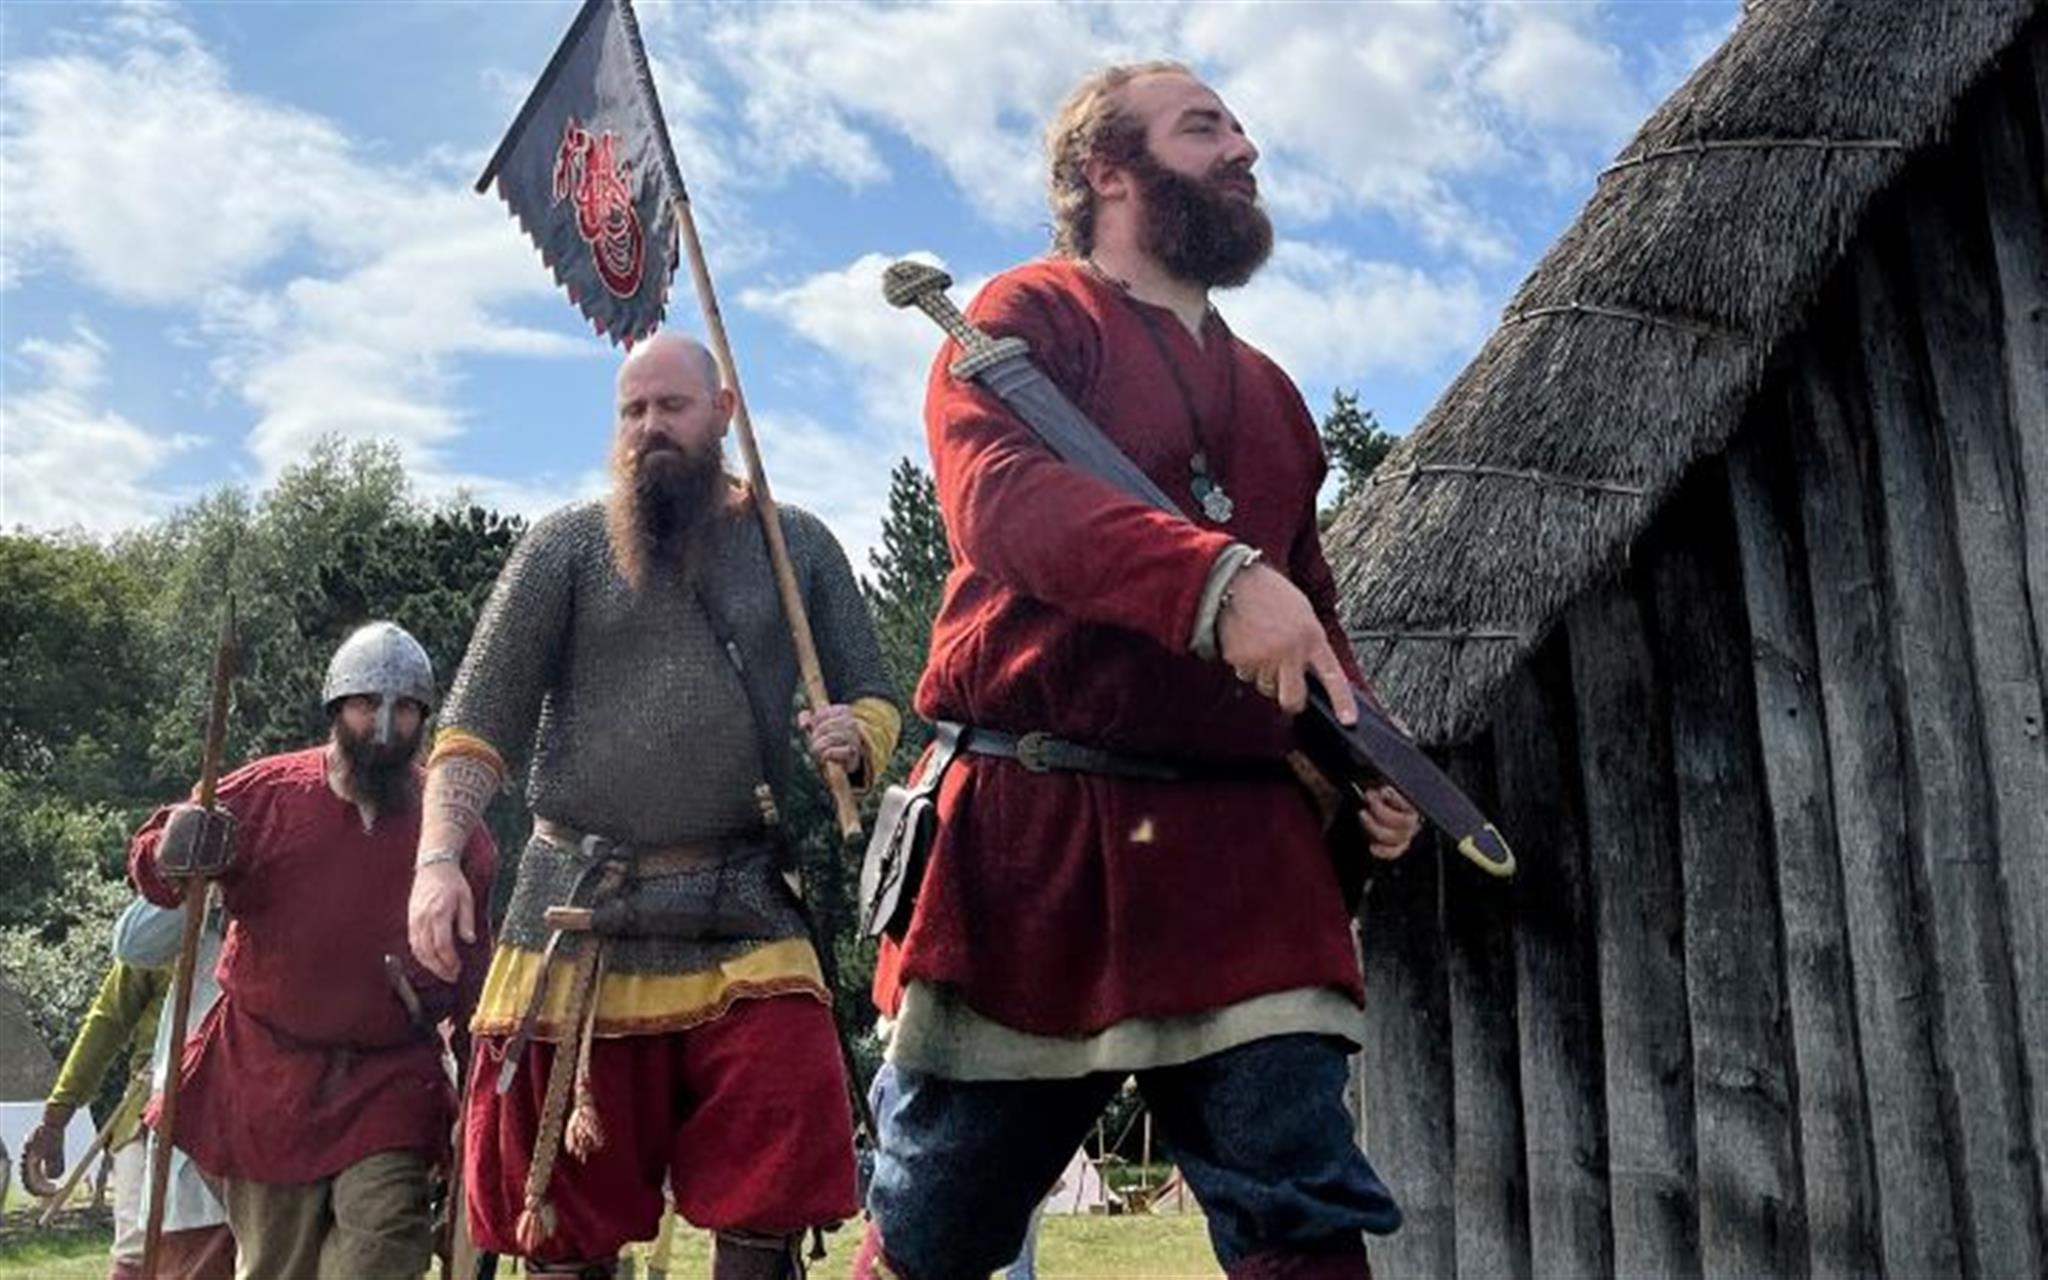 Meet the Vikings at West Stow